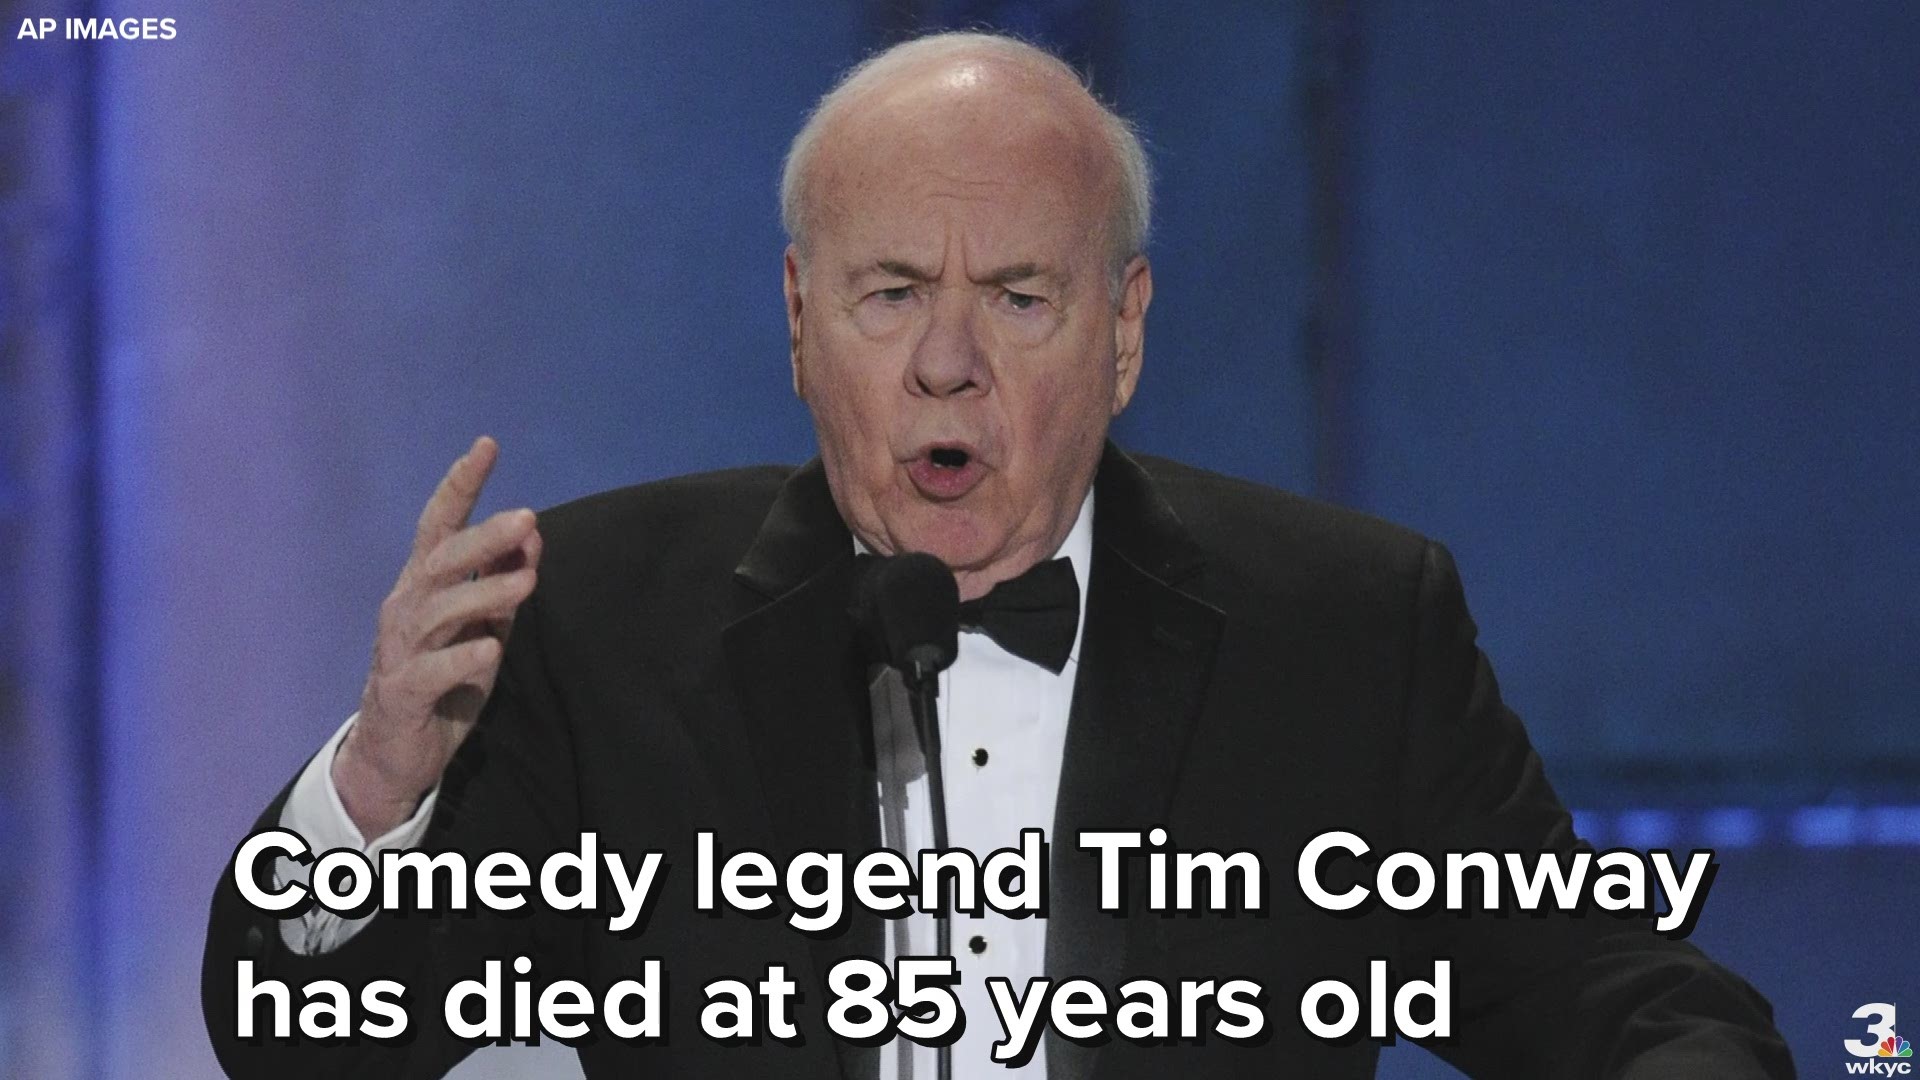 The beloved actor was known for characters like the Oldest Man and Mr. Tudball on 'The Carol Burnett Show.'